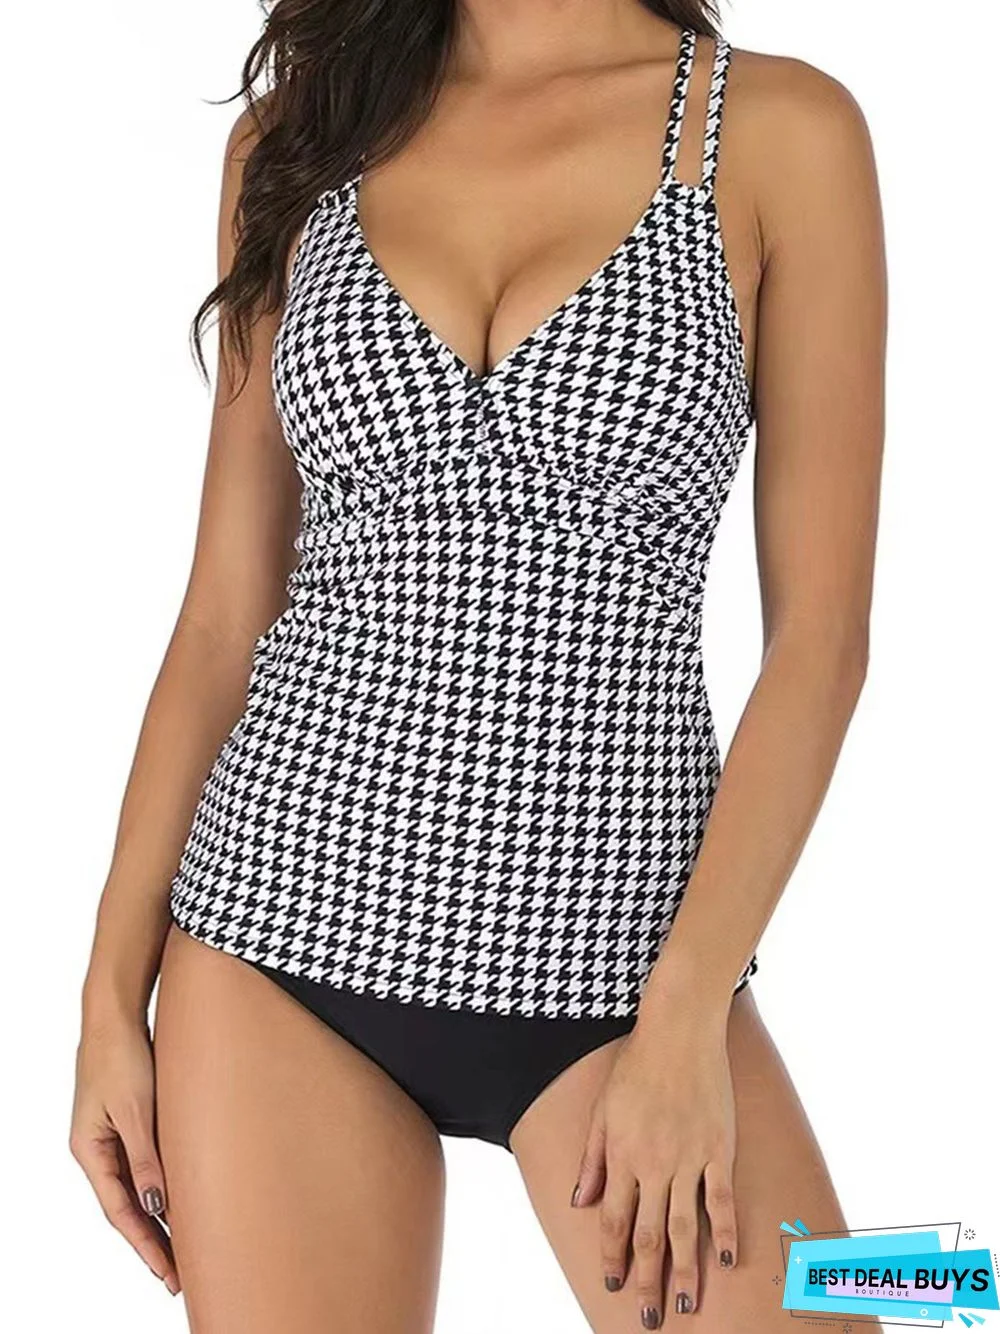 Women's Abstract Print Slim Fit Covering Belly Slim Brief Tankini Swimsuit